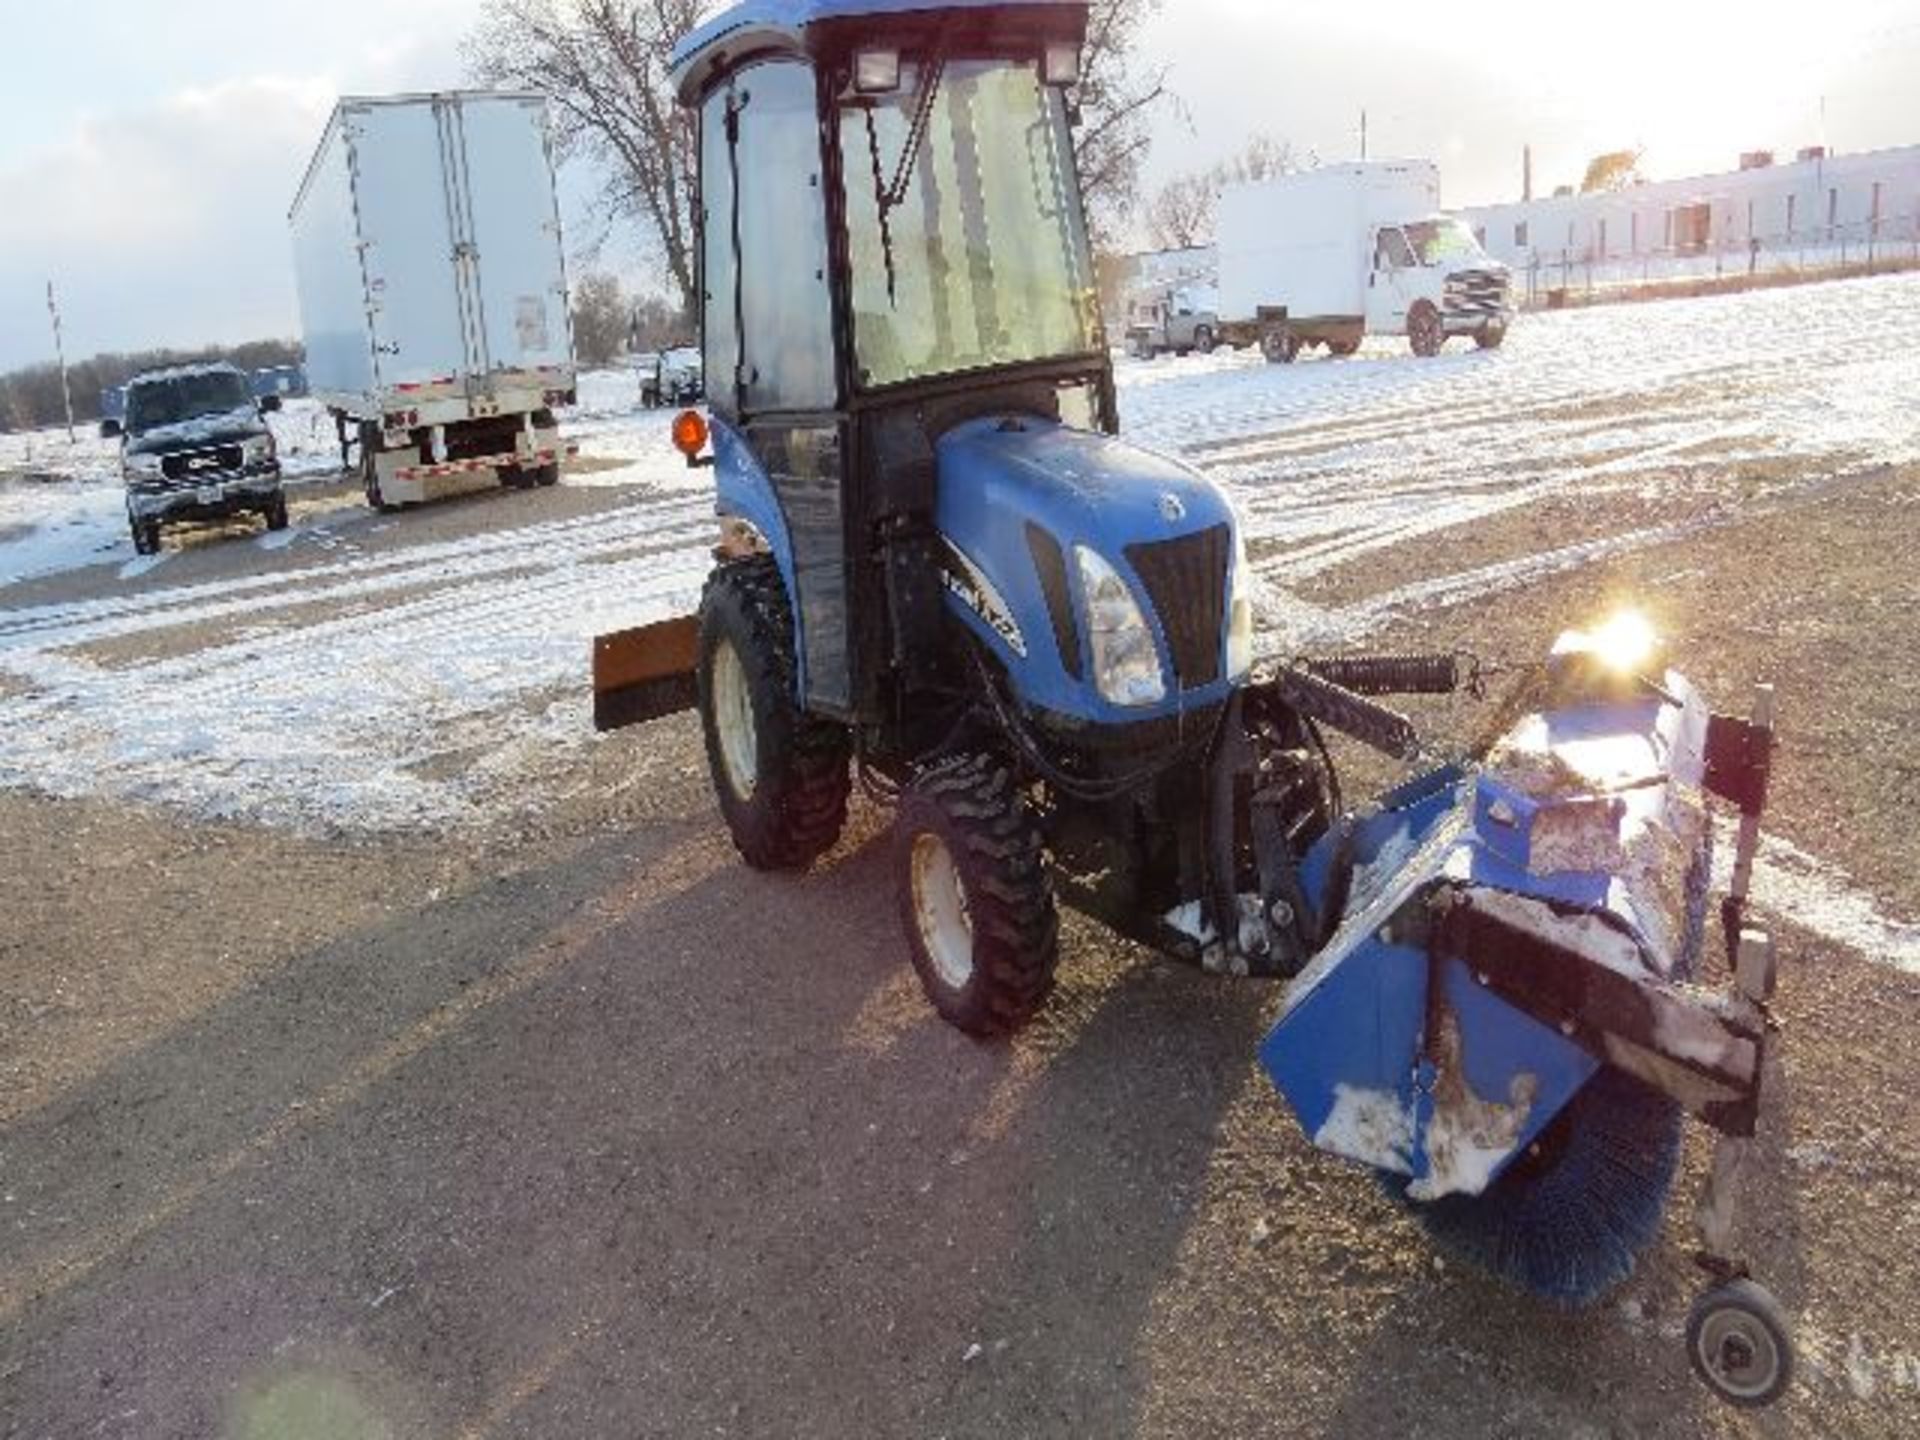 2004 New Holland model  TC24DA tractor, sn HG10183, 260 hrs. on meter, front wheel assist, cab, - Image 2 of 9